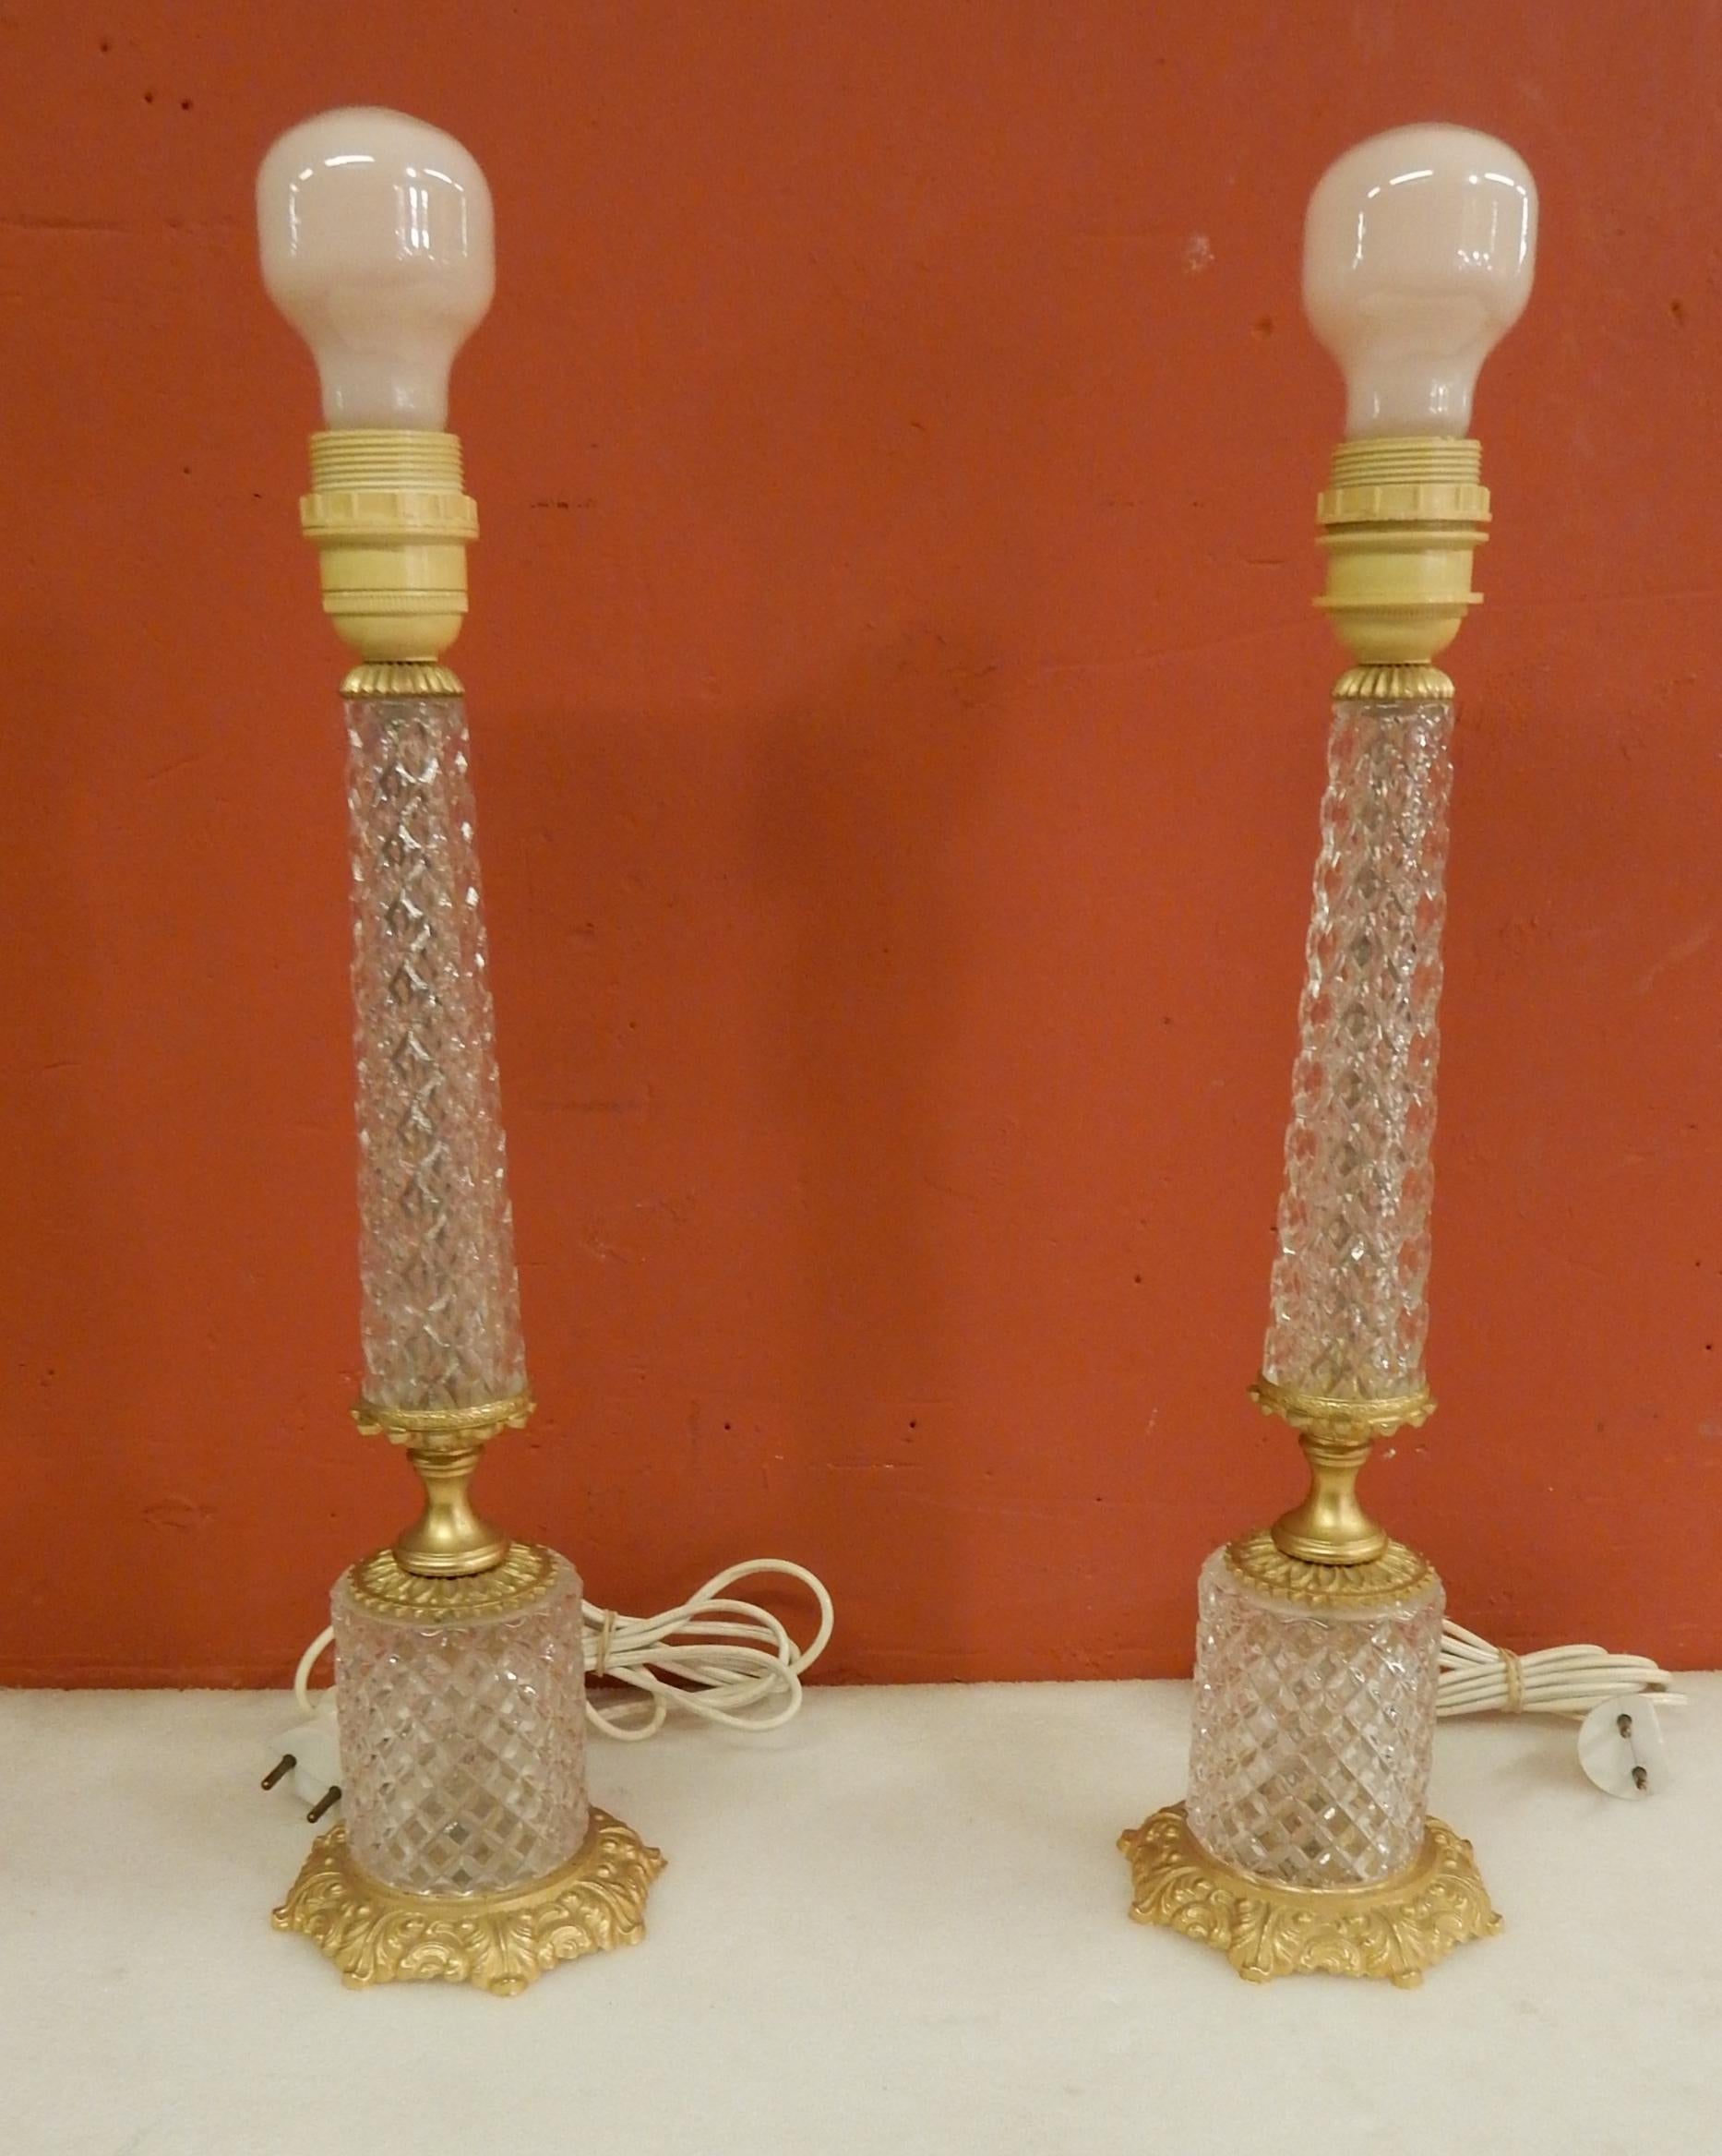 Pair of diamond point decor lamps, circa 1970, good condition, 1 bulb, height 38 cm does not take account of the socket.

 